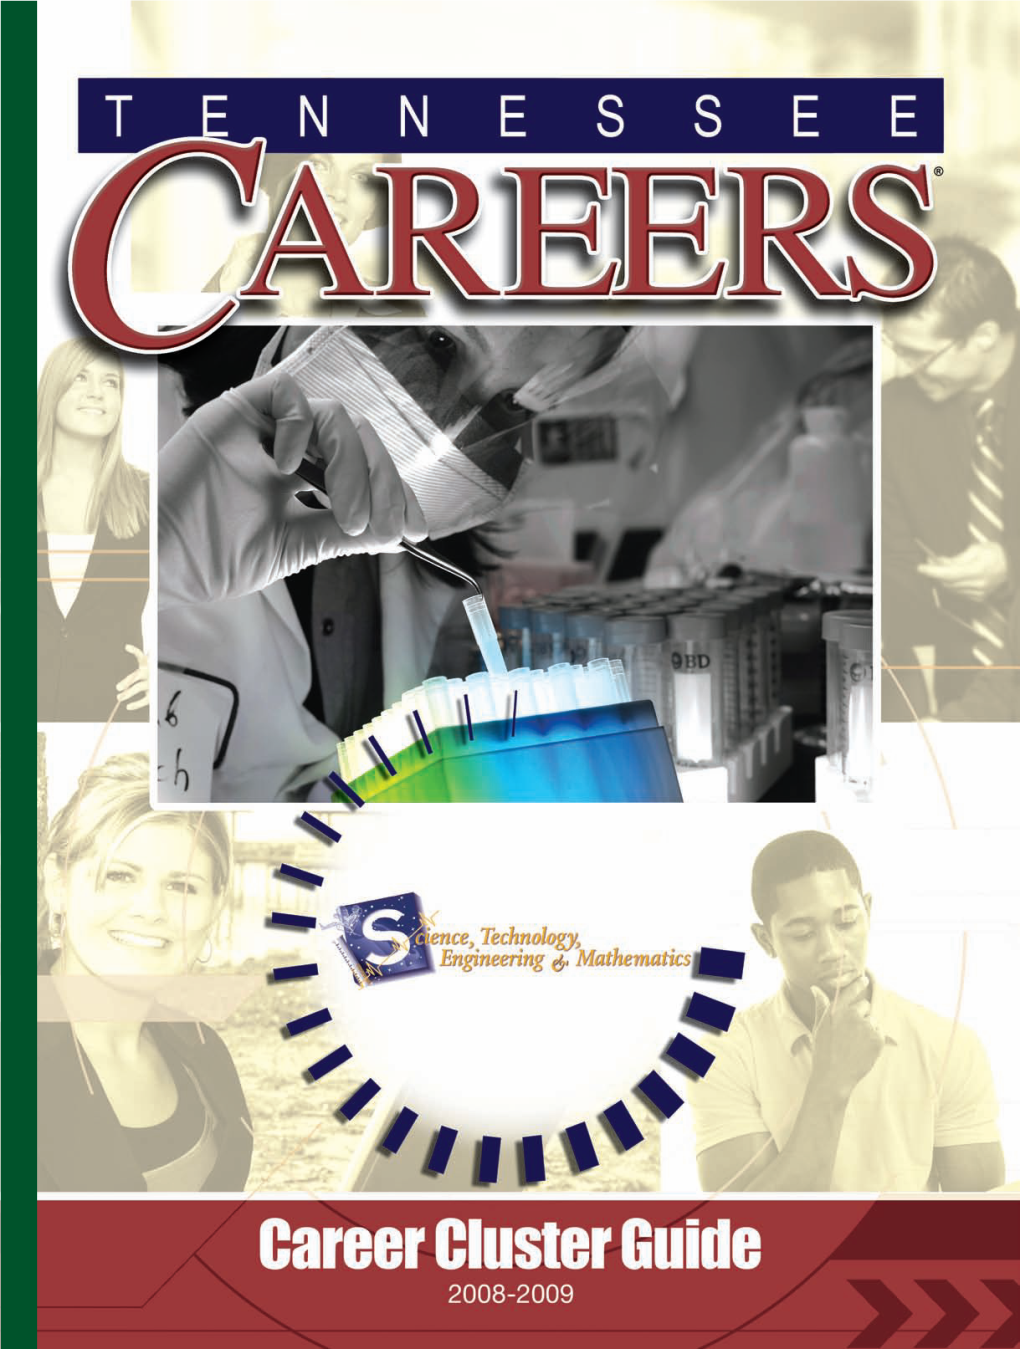 About the Science, Technology, Engineering & Mathematics Career Cluster